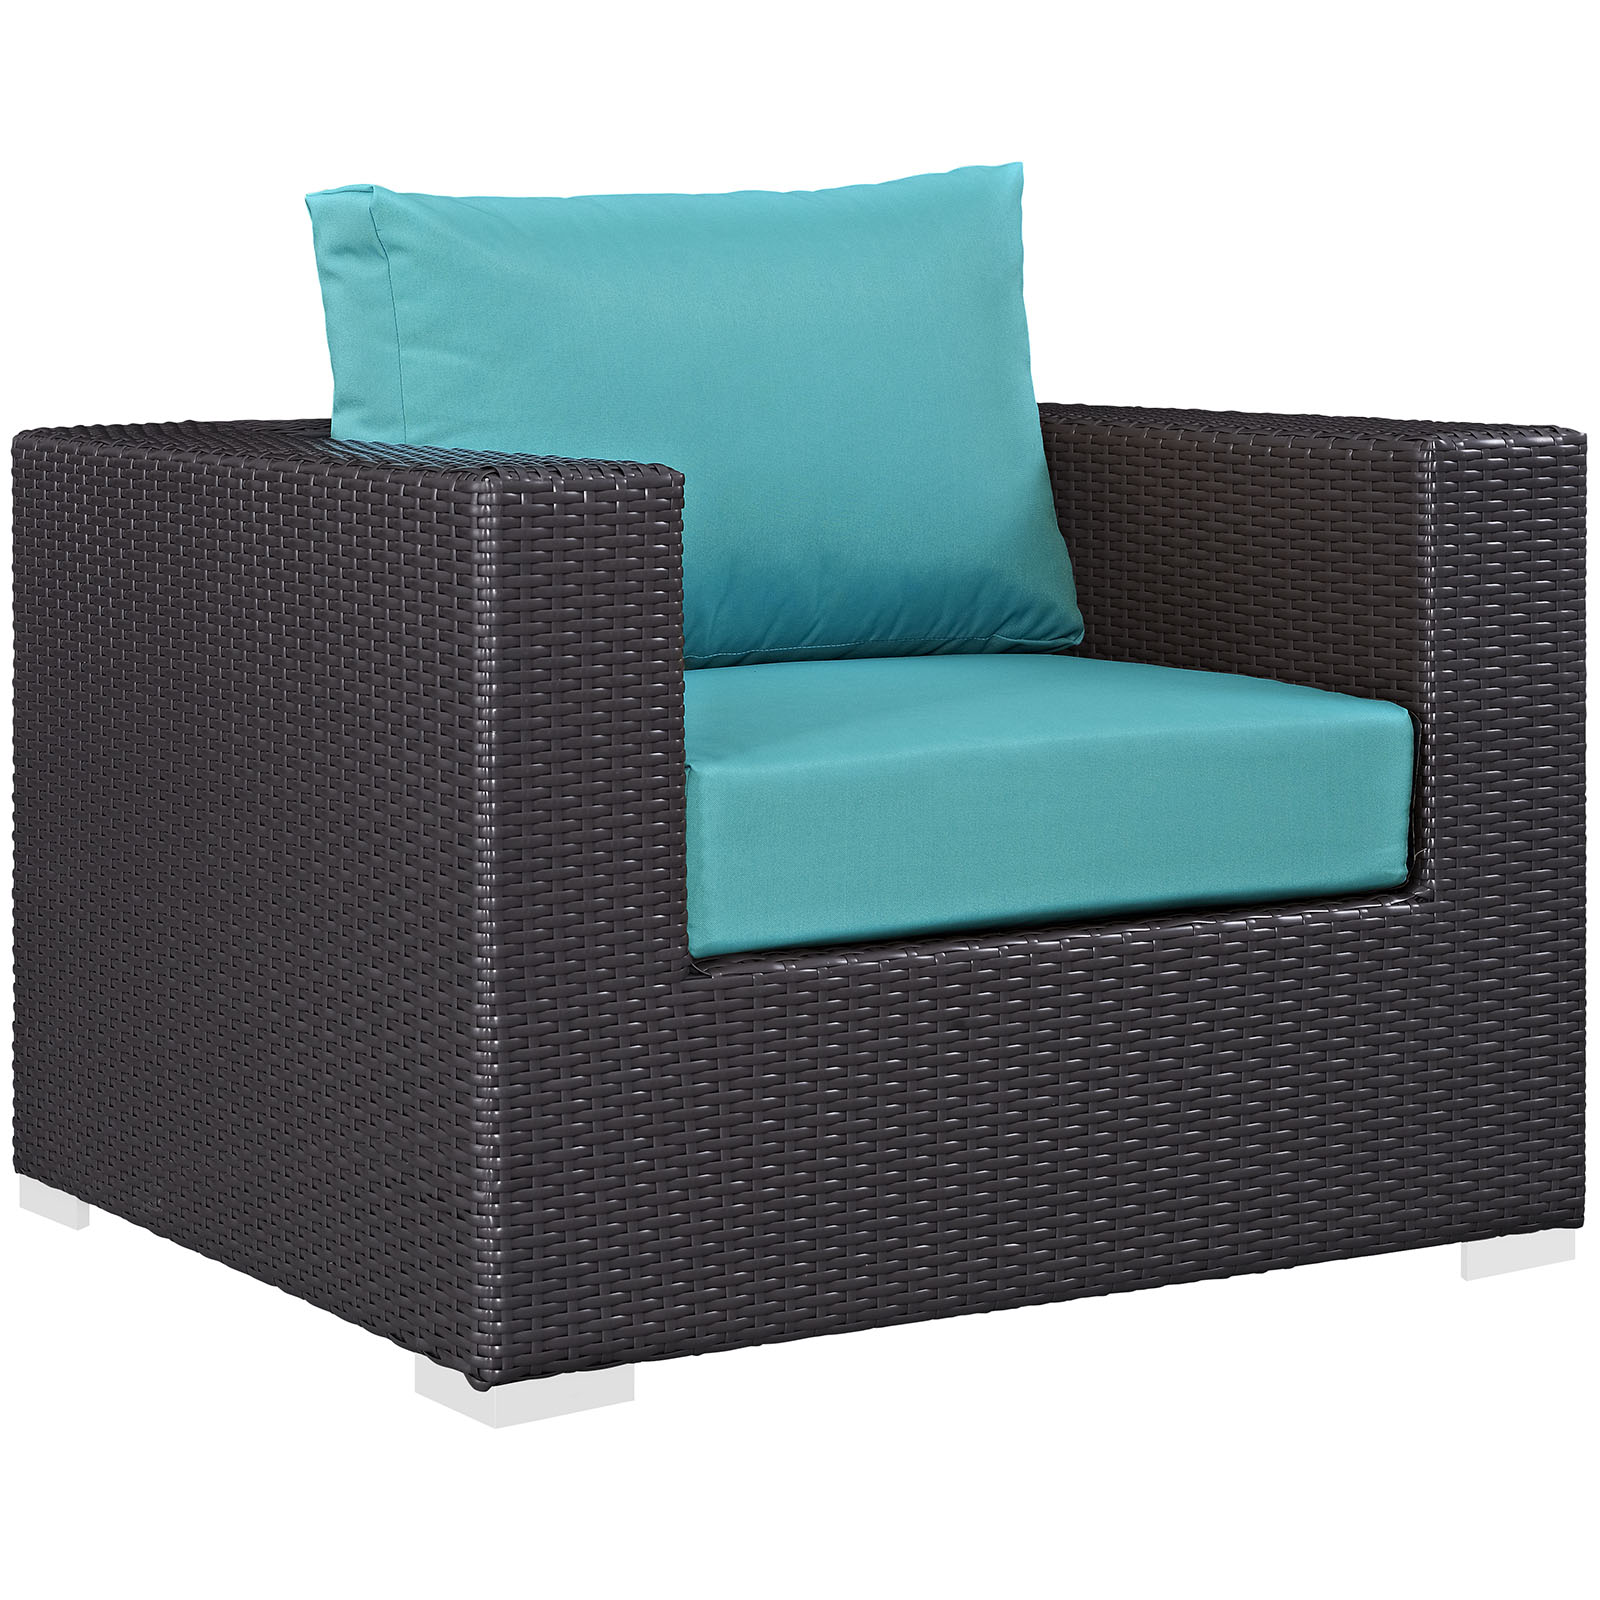 Modway Convene 6 Piece Outdoor Patio Sectional Set in Espresso Turquoise - image 5 of 8